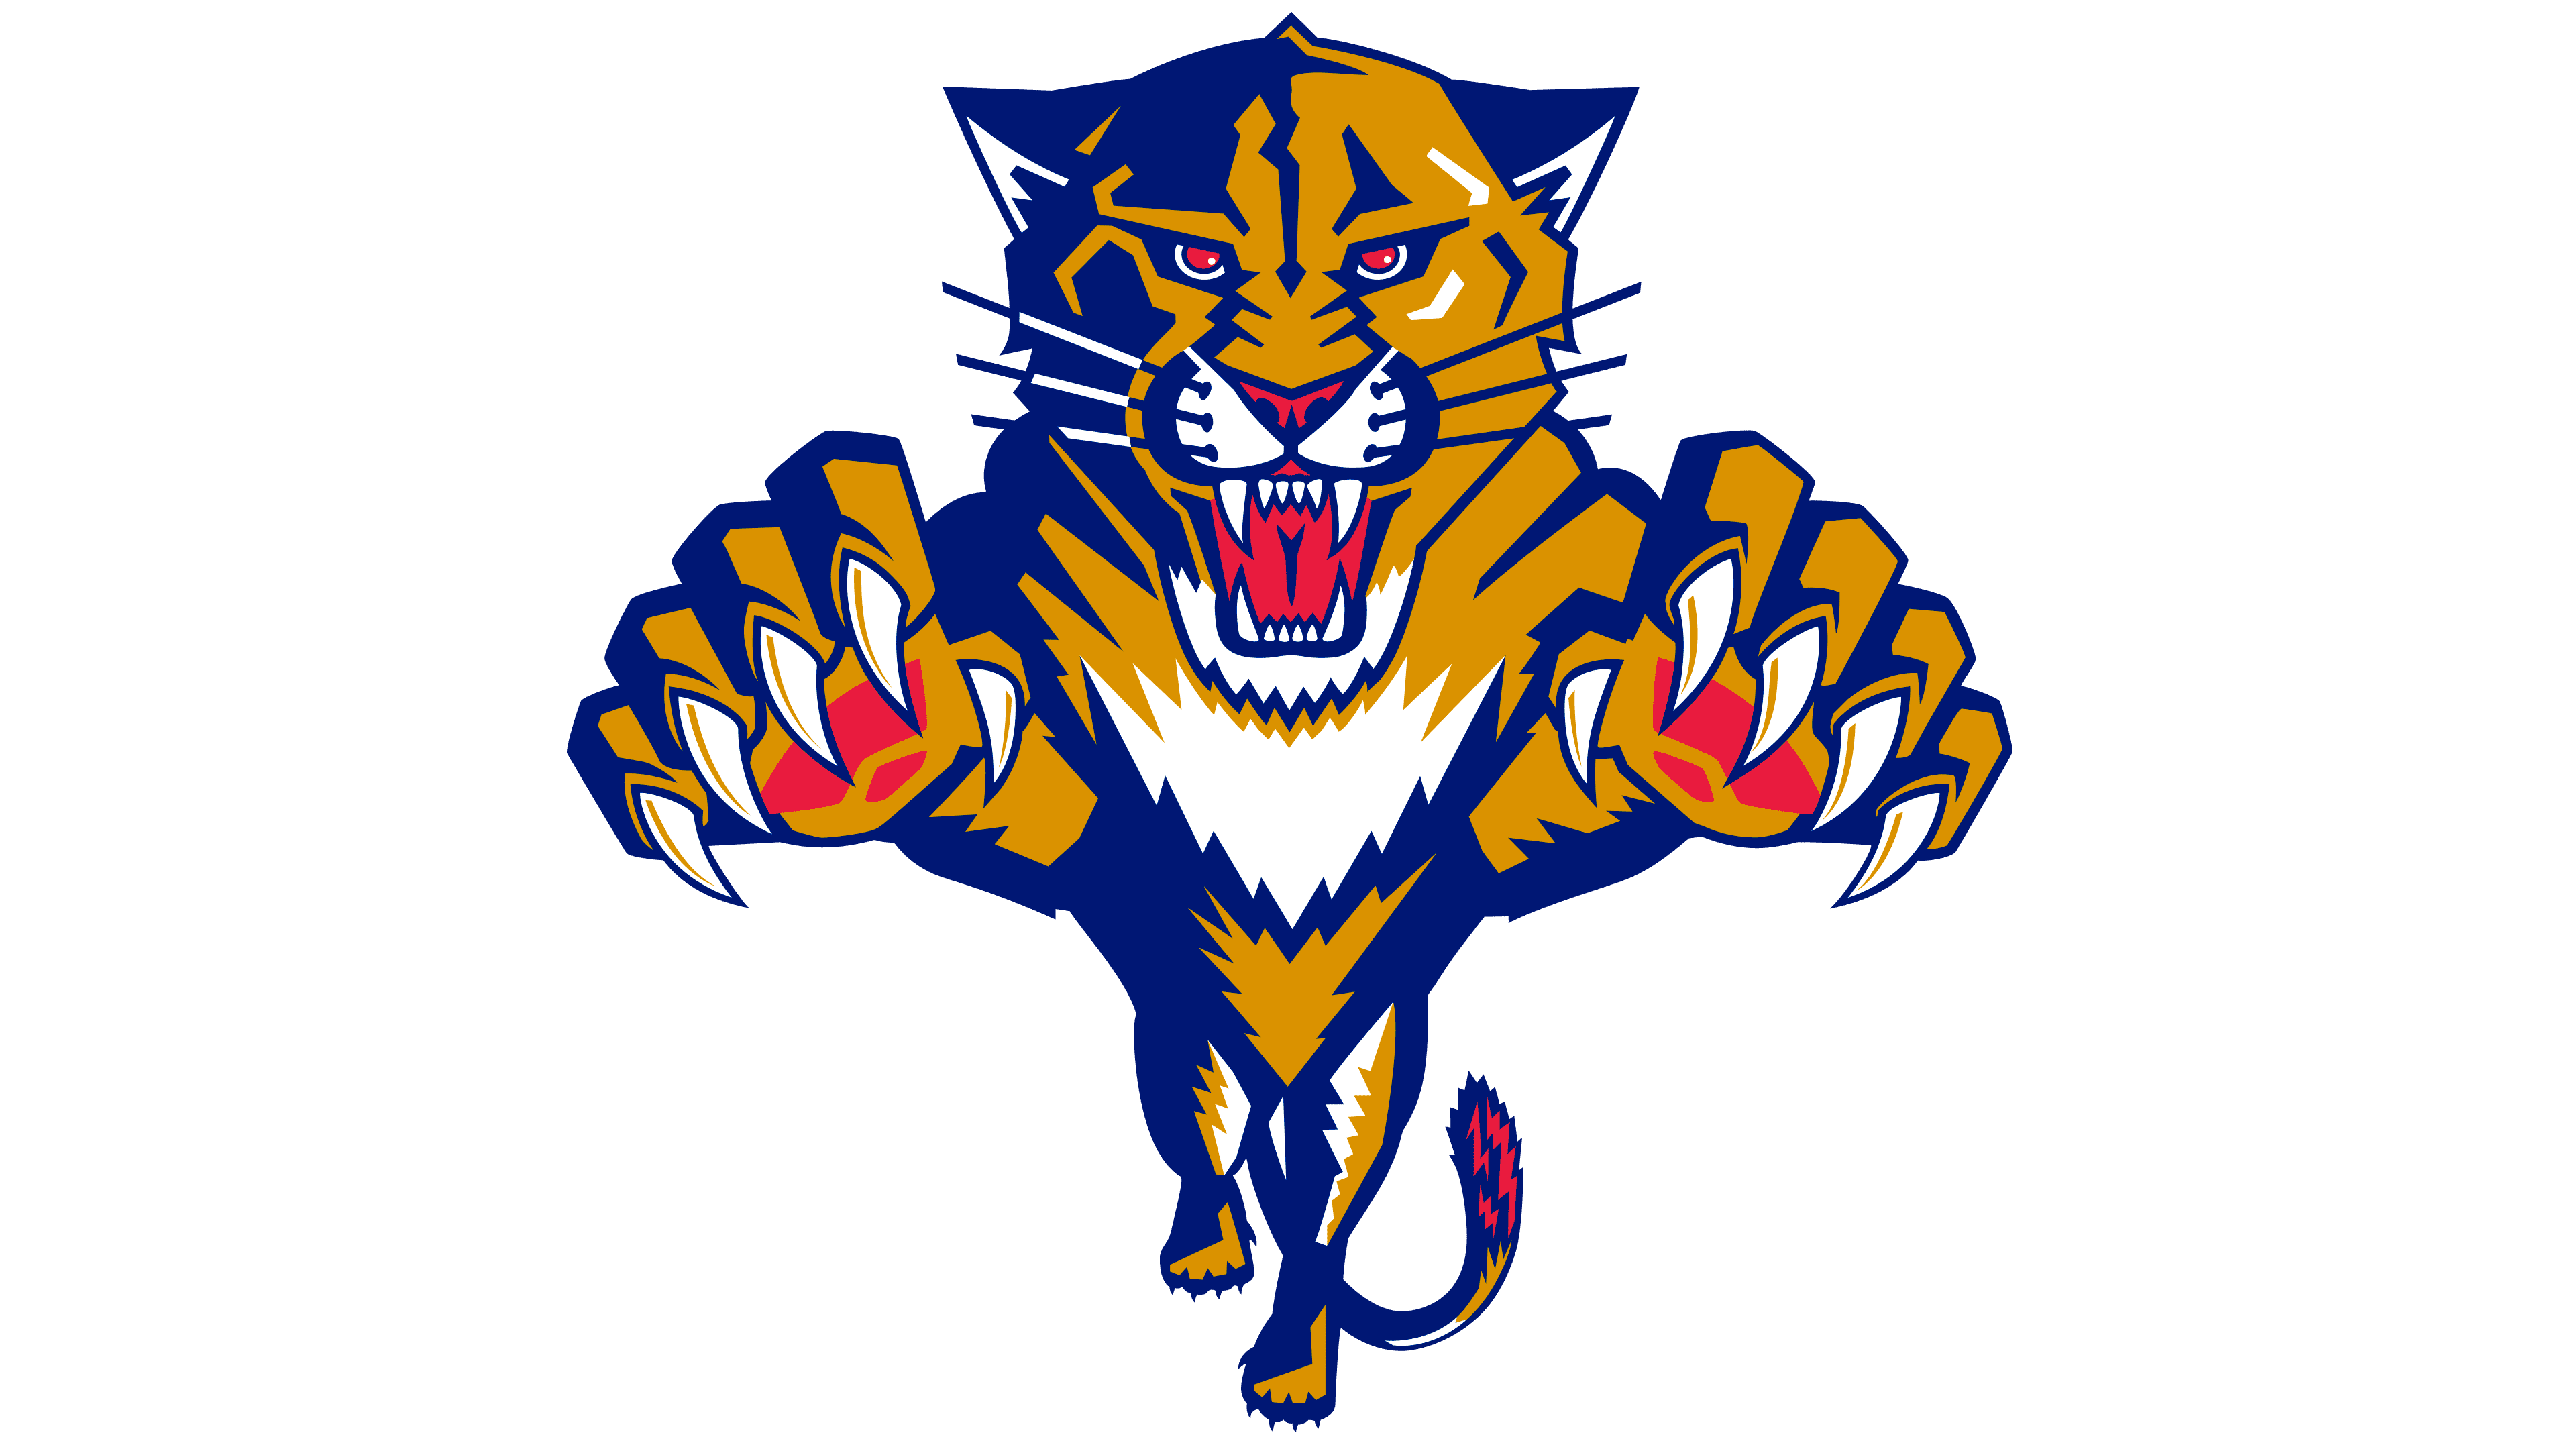 Florida Panthers Logo Symbol Meaning History Png Brand